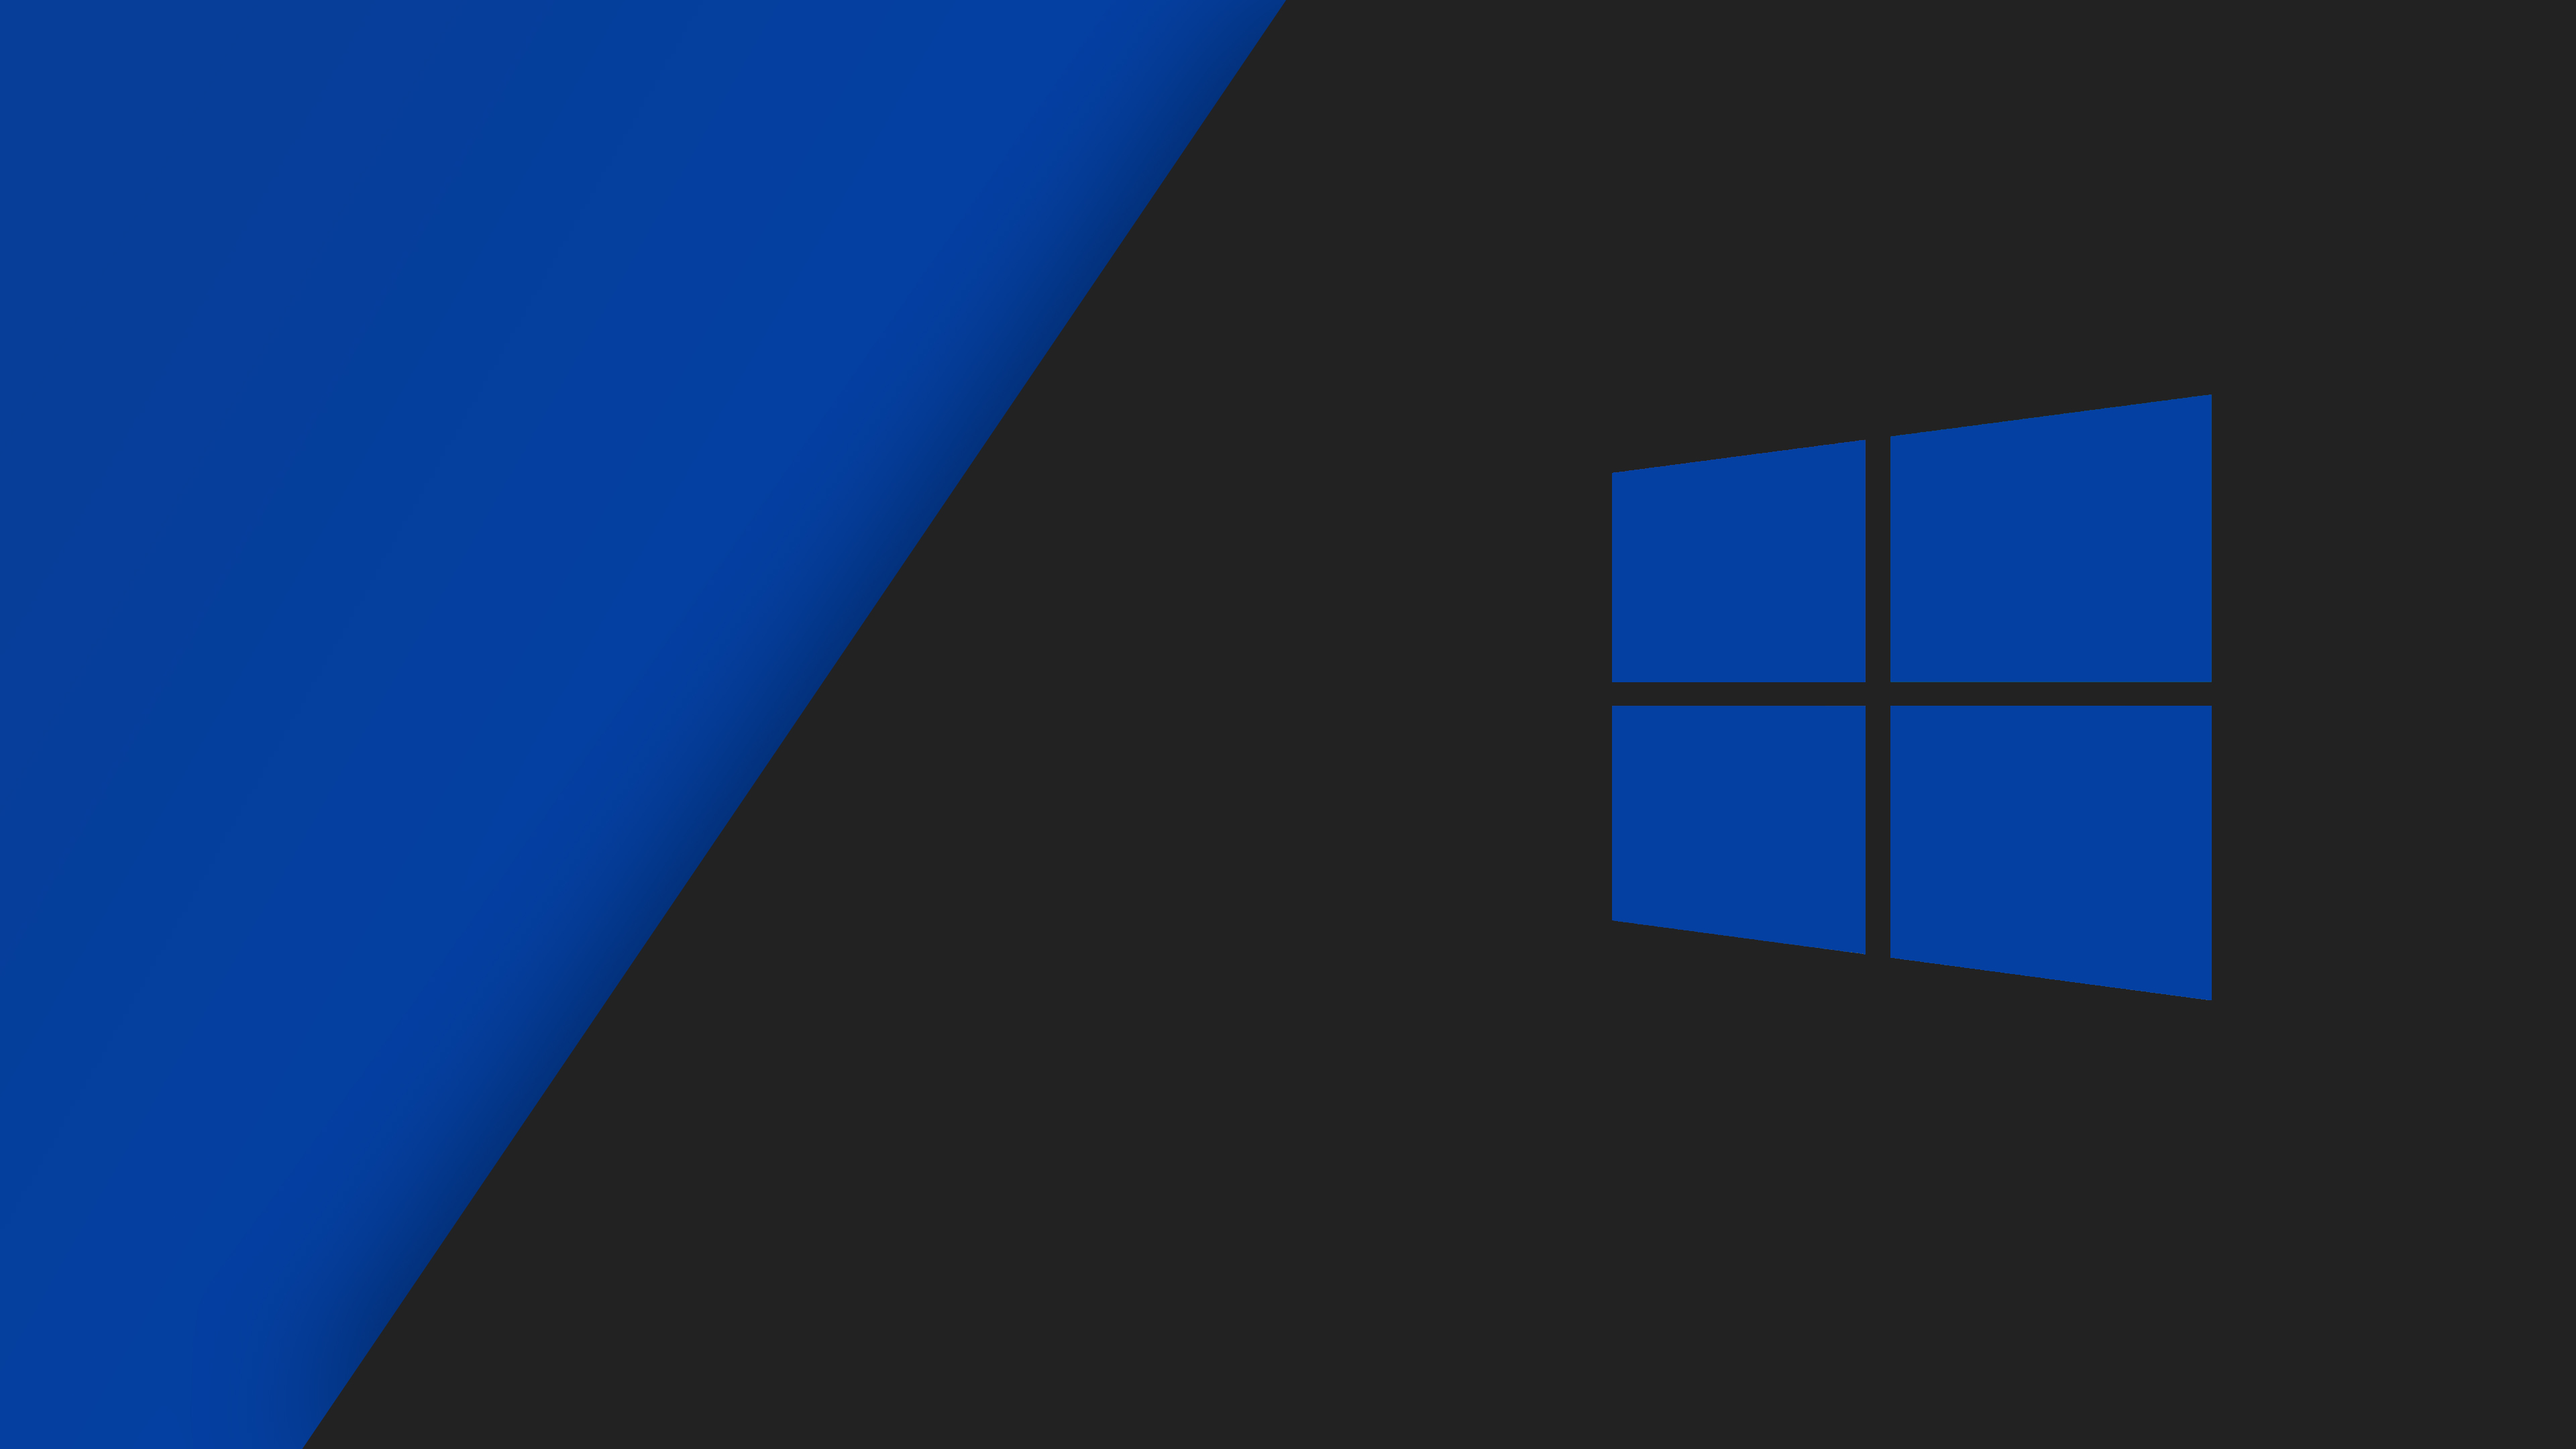 Windows 10 Wallpapers High Quality  Download Free